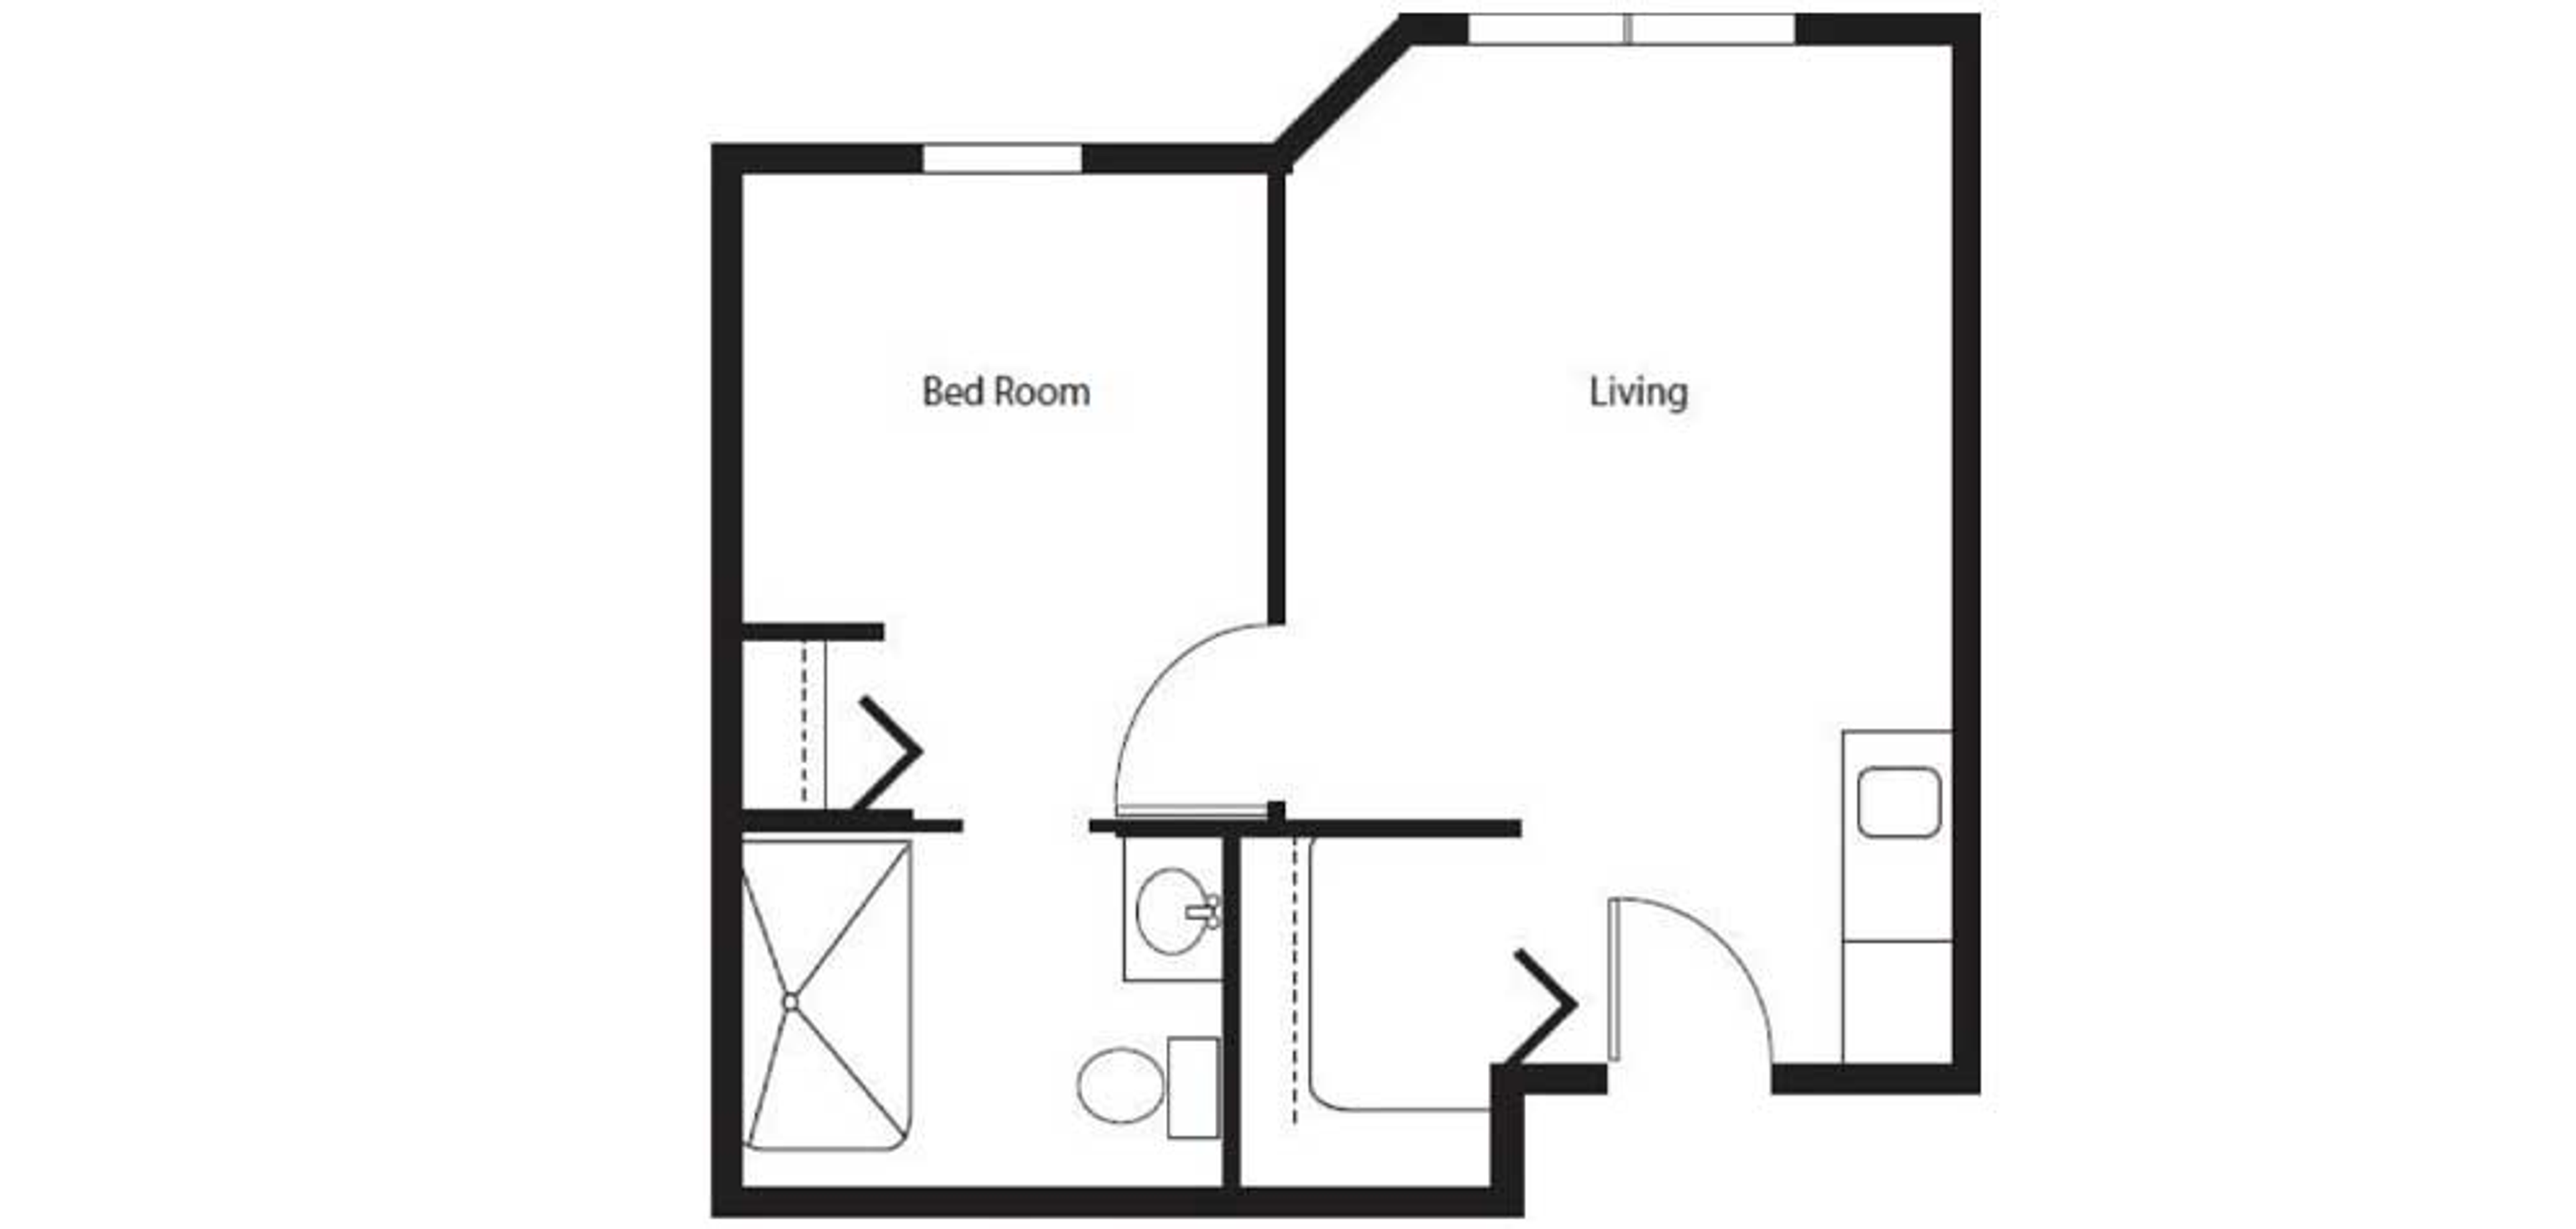 Floorplan - Pelican Pointe - 1 bed, 1 bath, 437 sq. ft. Assisted Living